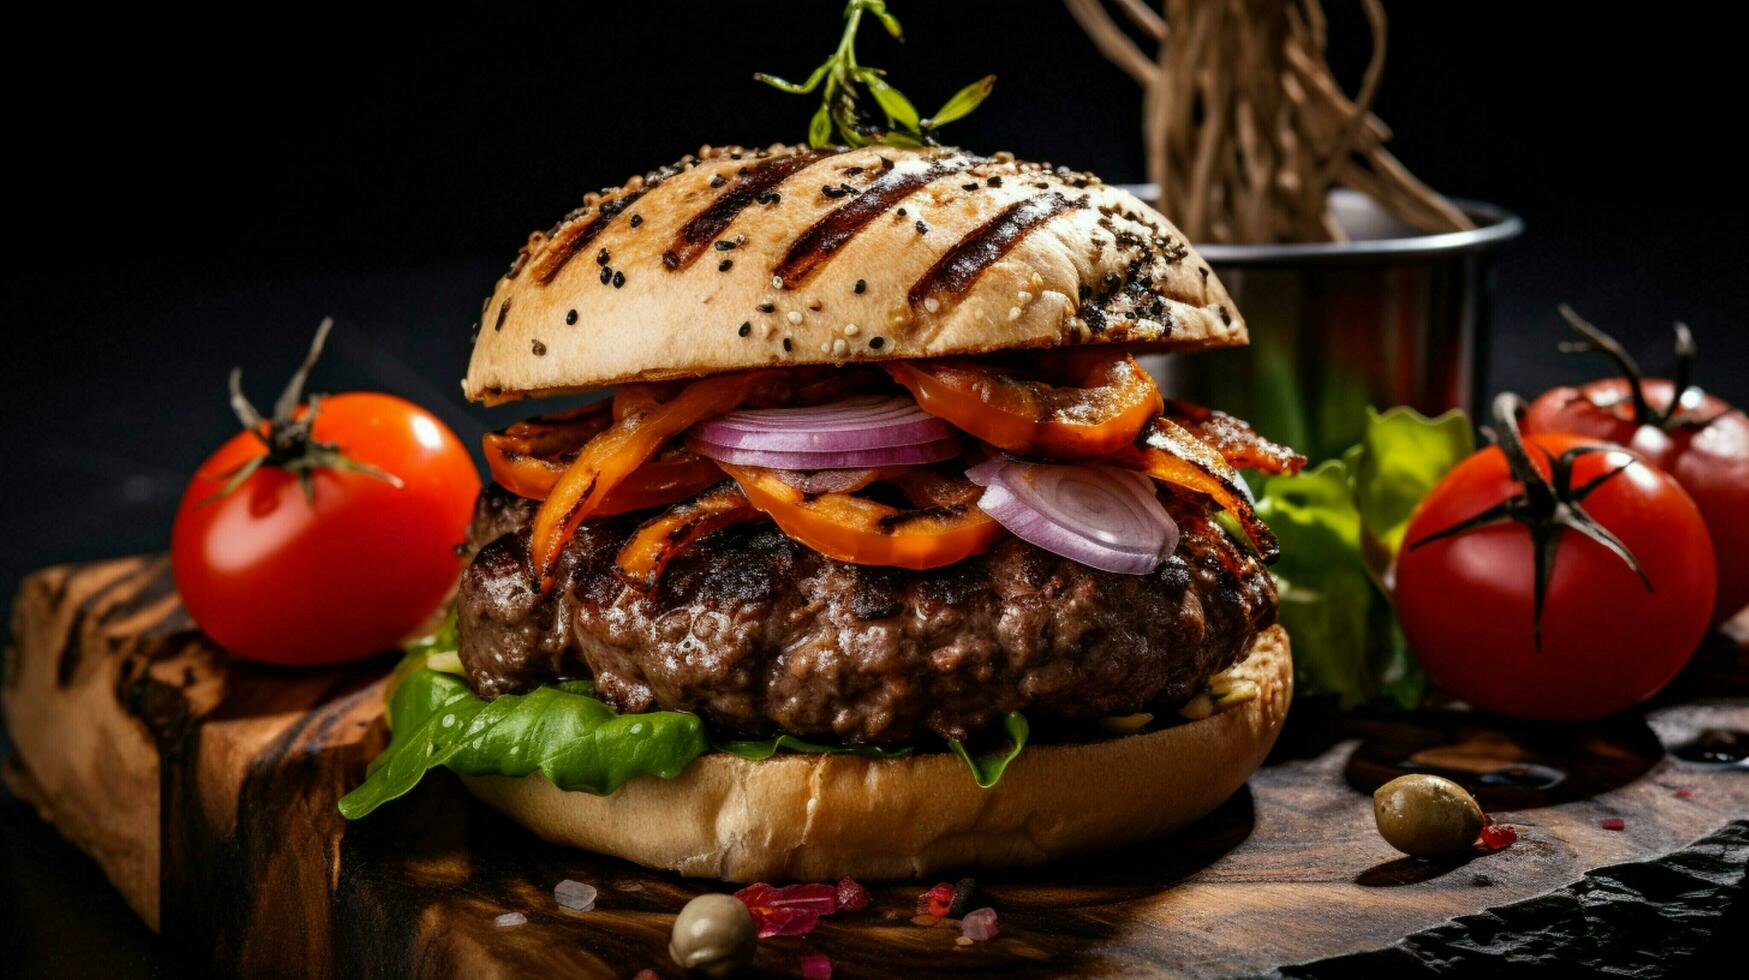 grilled beef burger with tomato onion and homemade bread photo